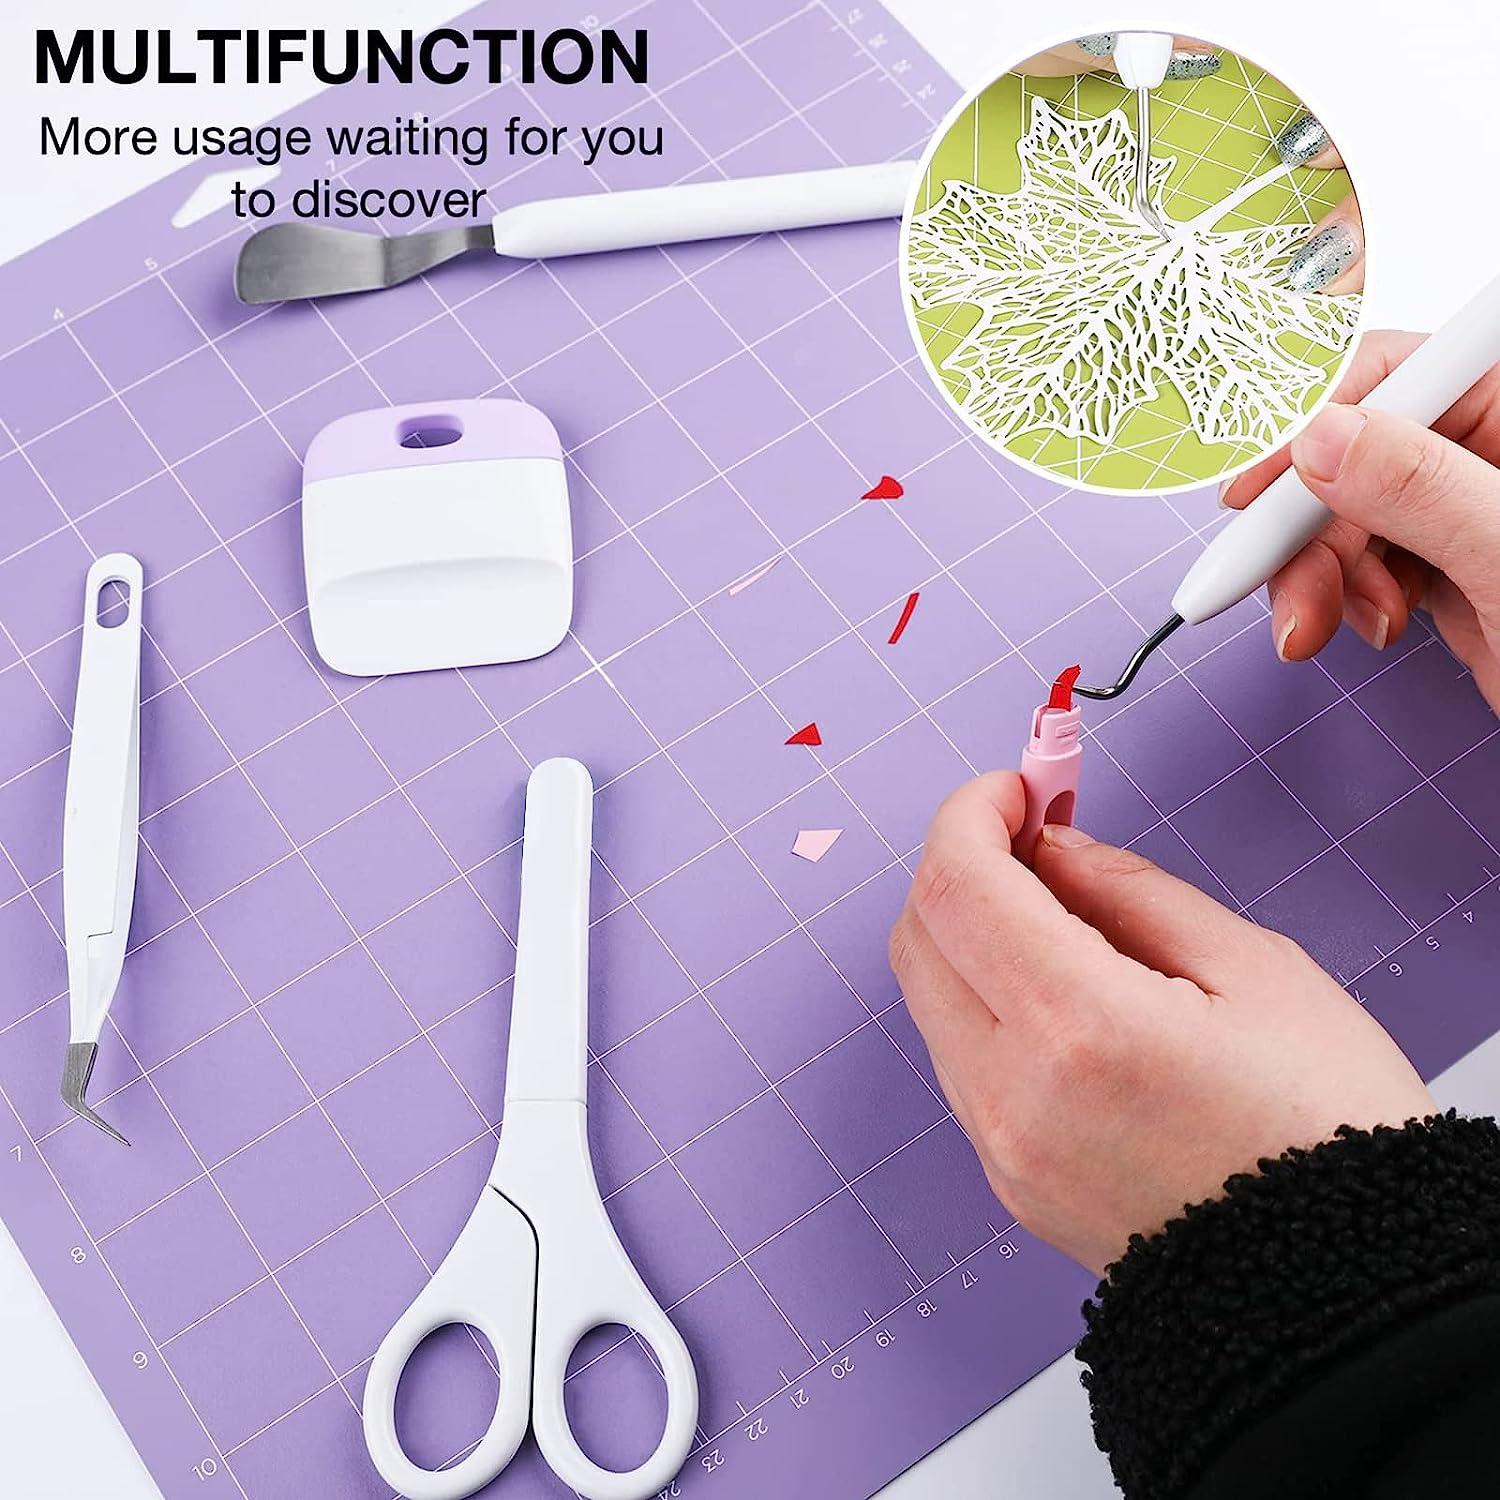 13 Pcs Vinyl Weeding Tools Stainless Steel Plotter Accessories HTV  Precision Carving Craft Hobby Knife Kit +1 Piece Storage Bag Silhouettes  Cameos DIY Art Work Cutting Scrapbook